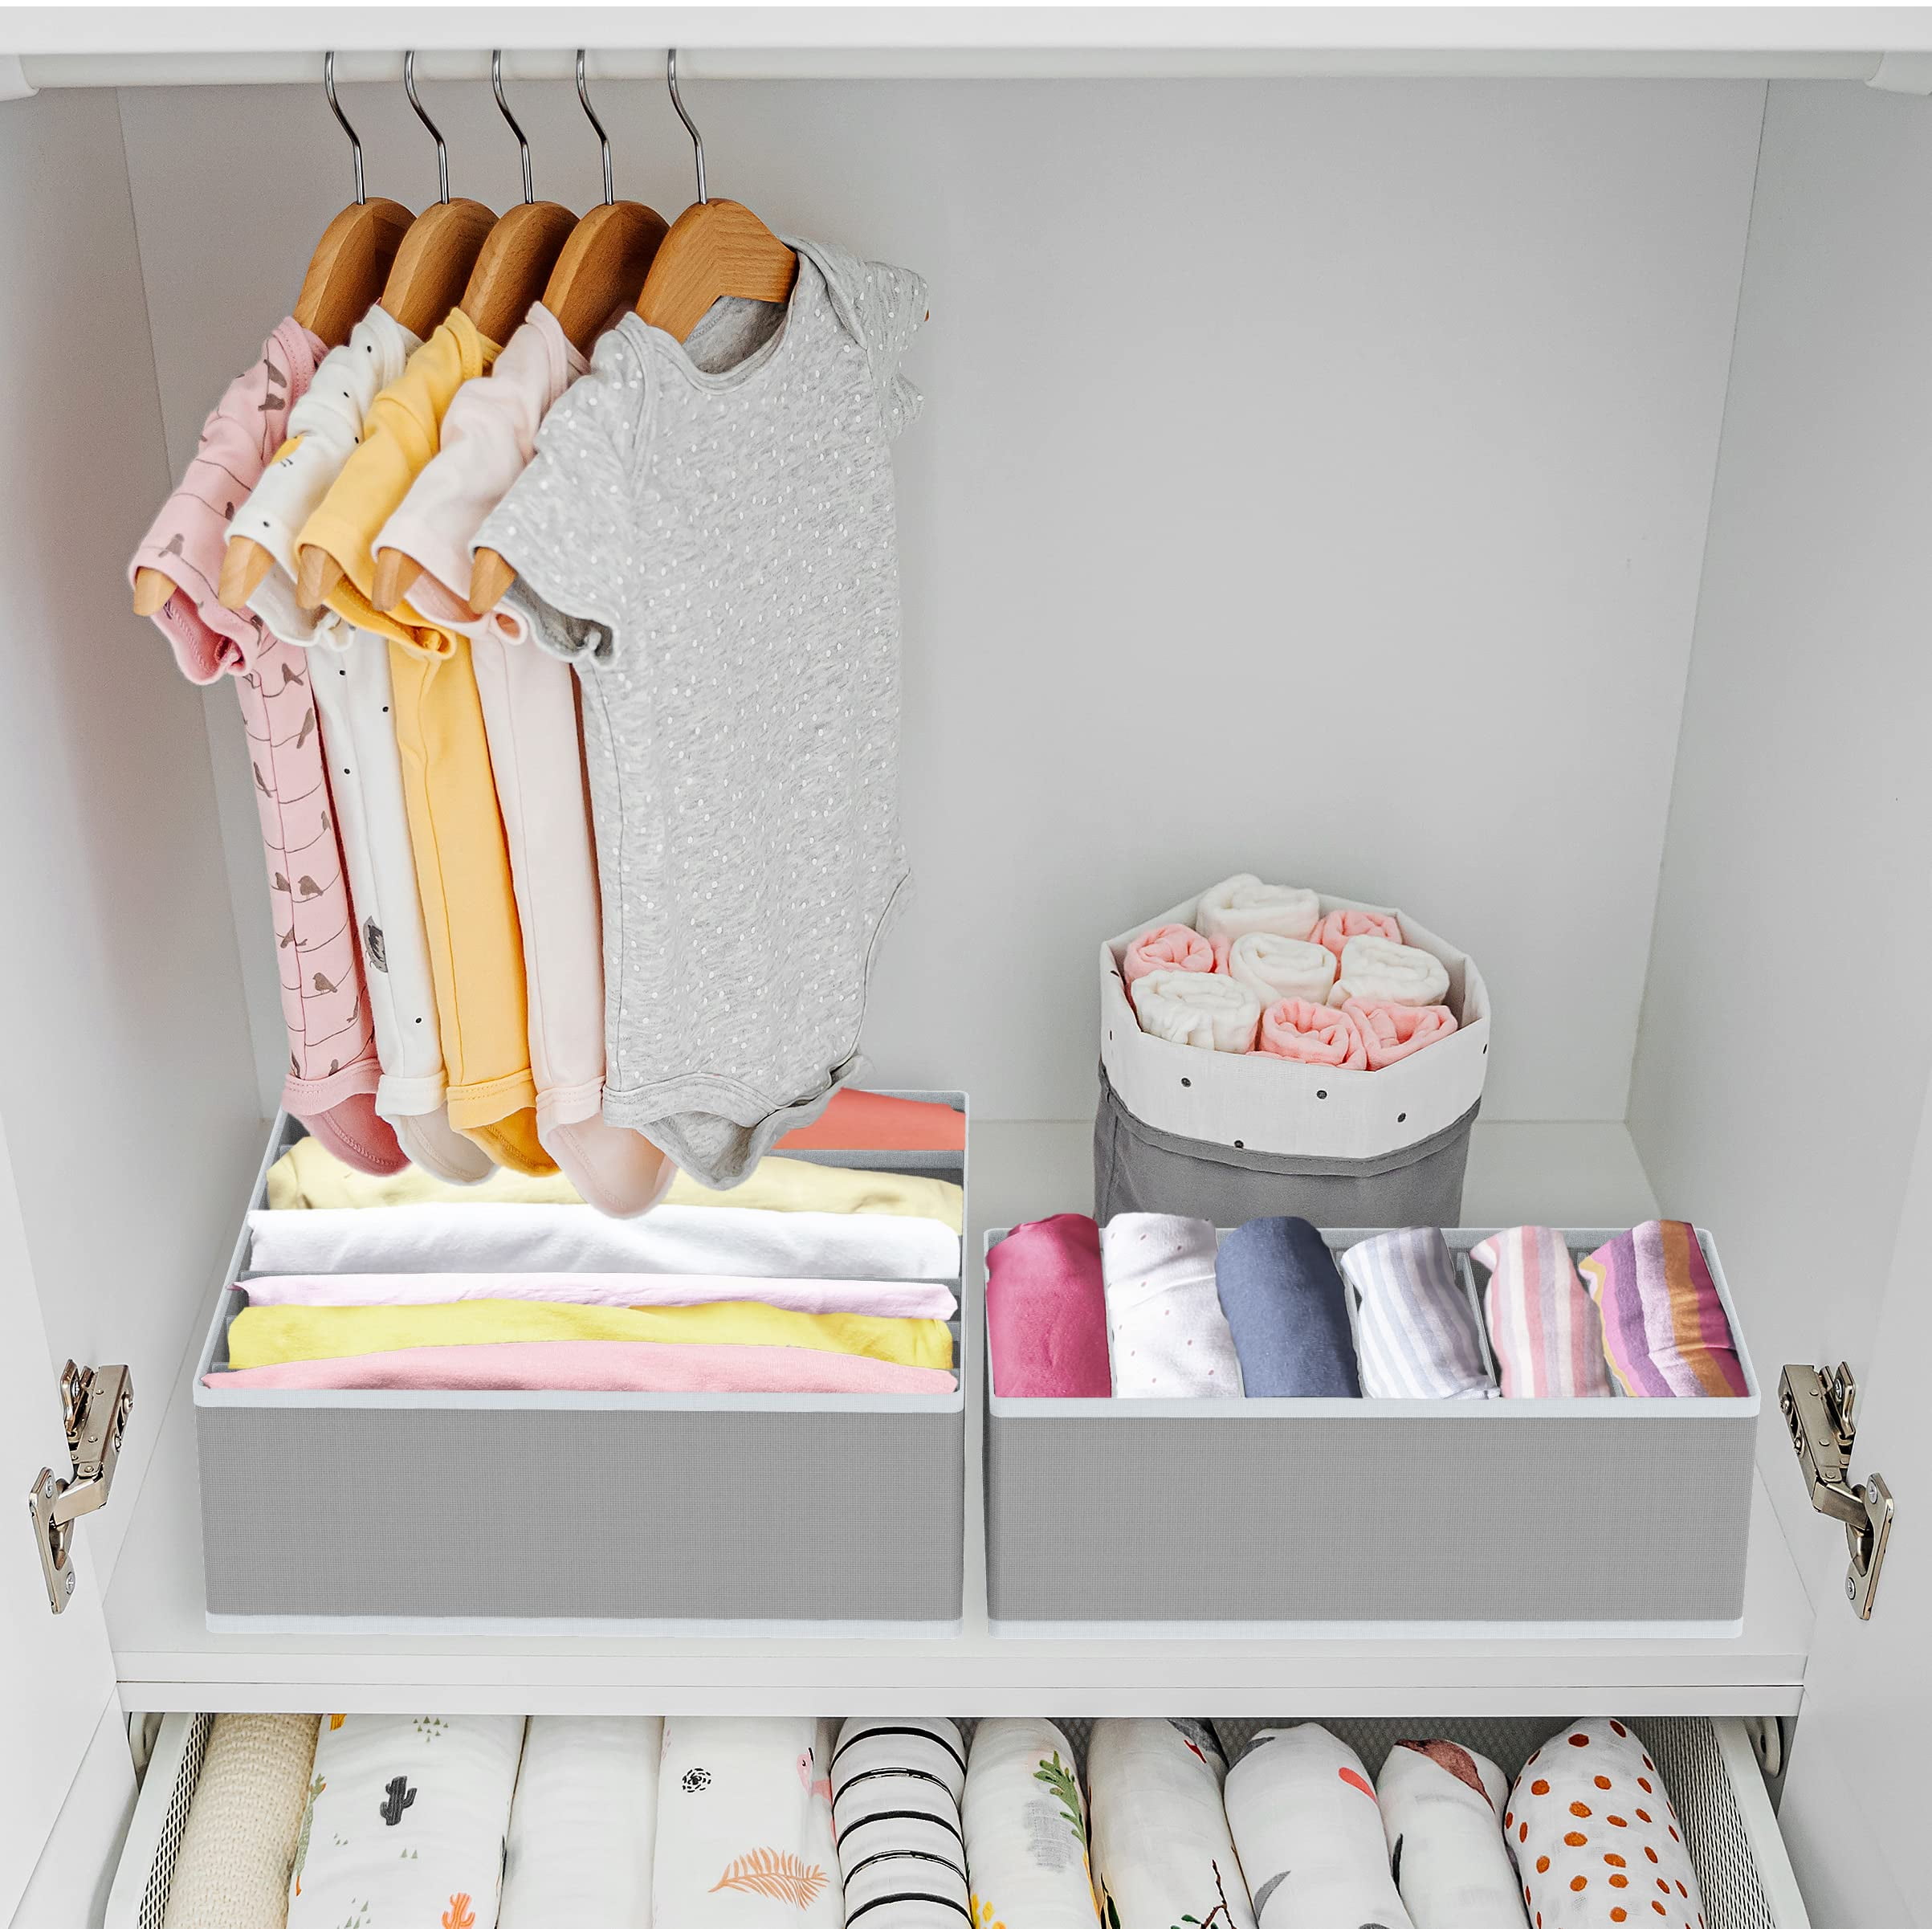 Lpoqw Dresser Drawer Organizer Storage Box With Compartments For Leggings  Closet Clothes Drawer Mesh Separation Box Stackable Drawer For Pants White